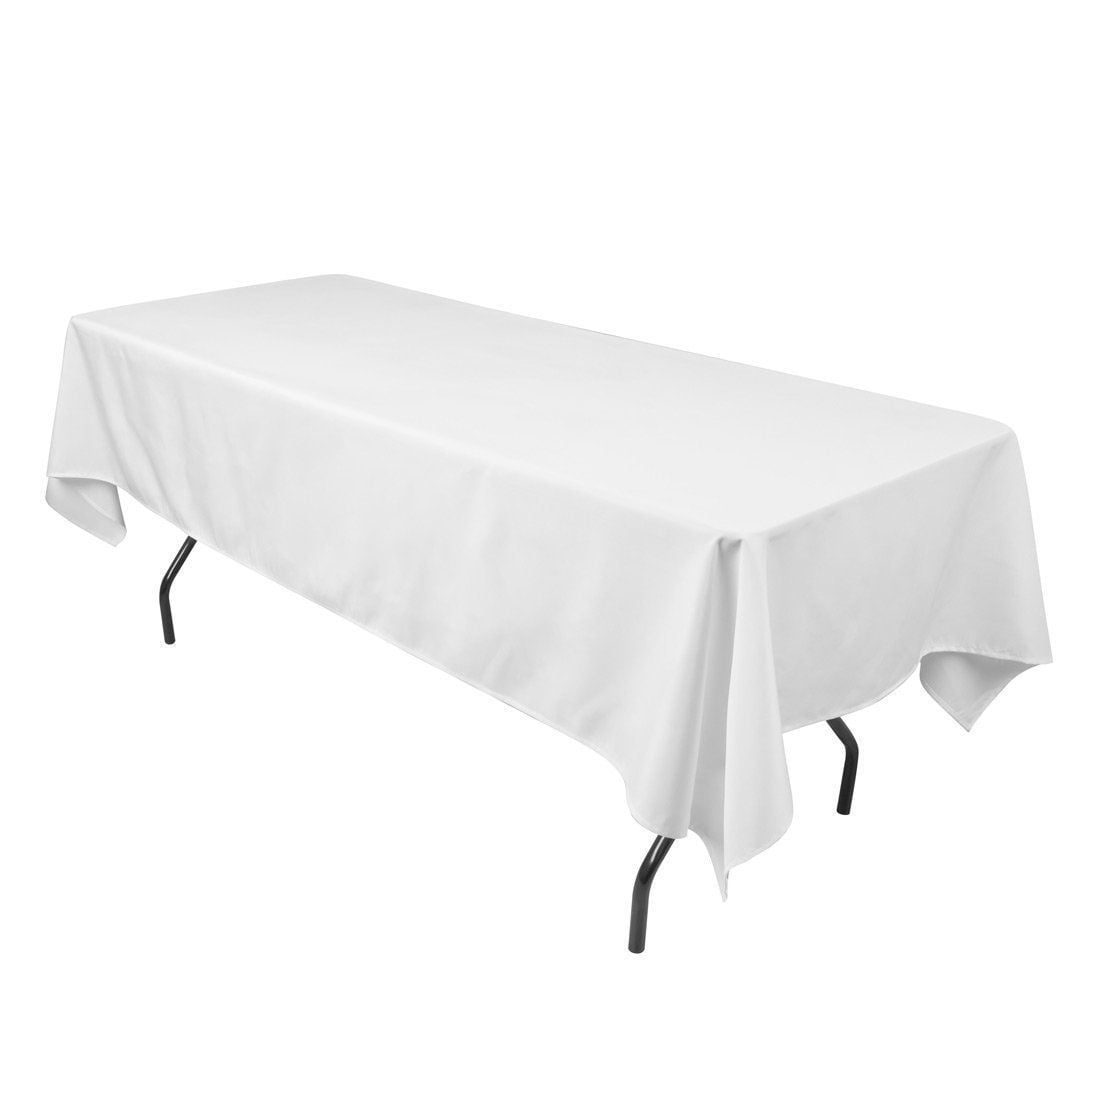 25 pack 60x120" Rectangle Satin Tablecloth Wedding SEAMLESS Catering Table Cover